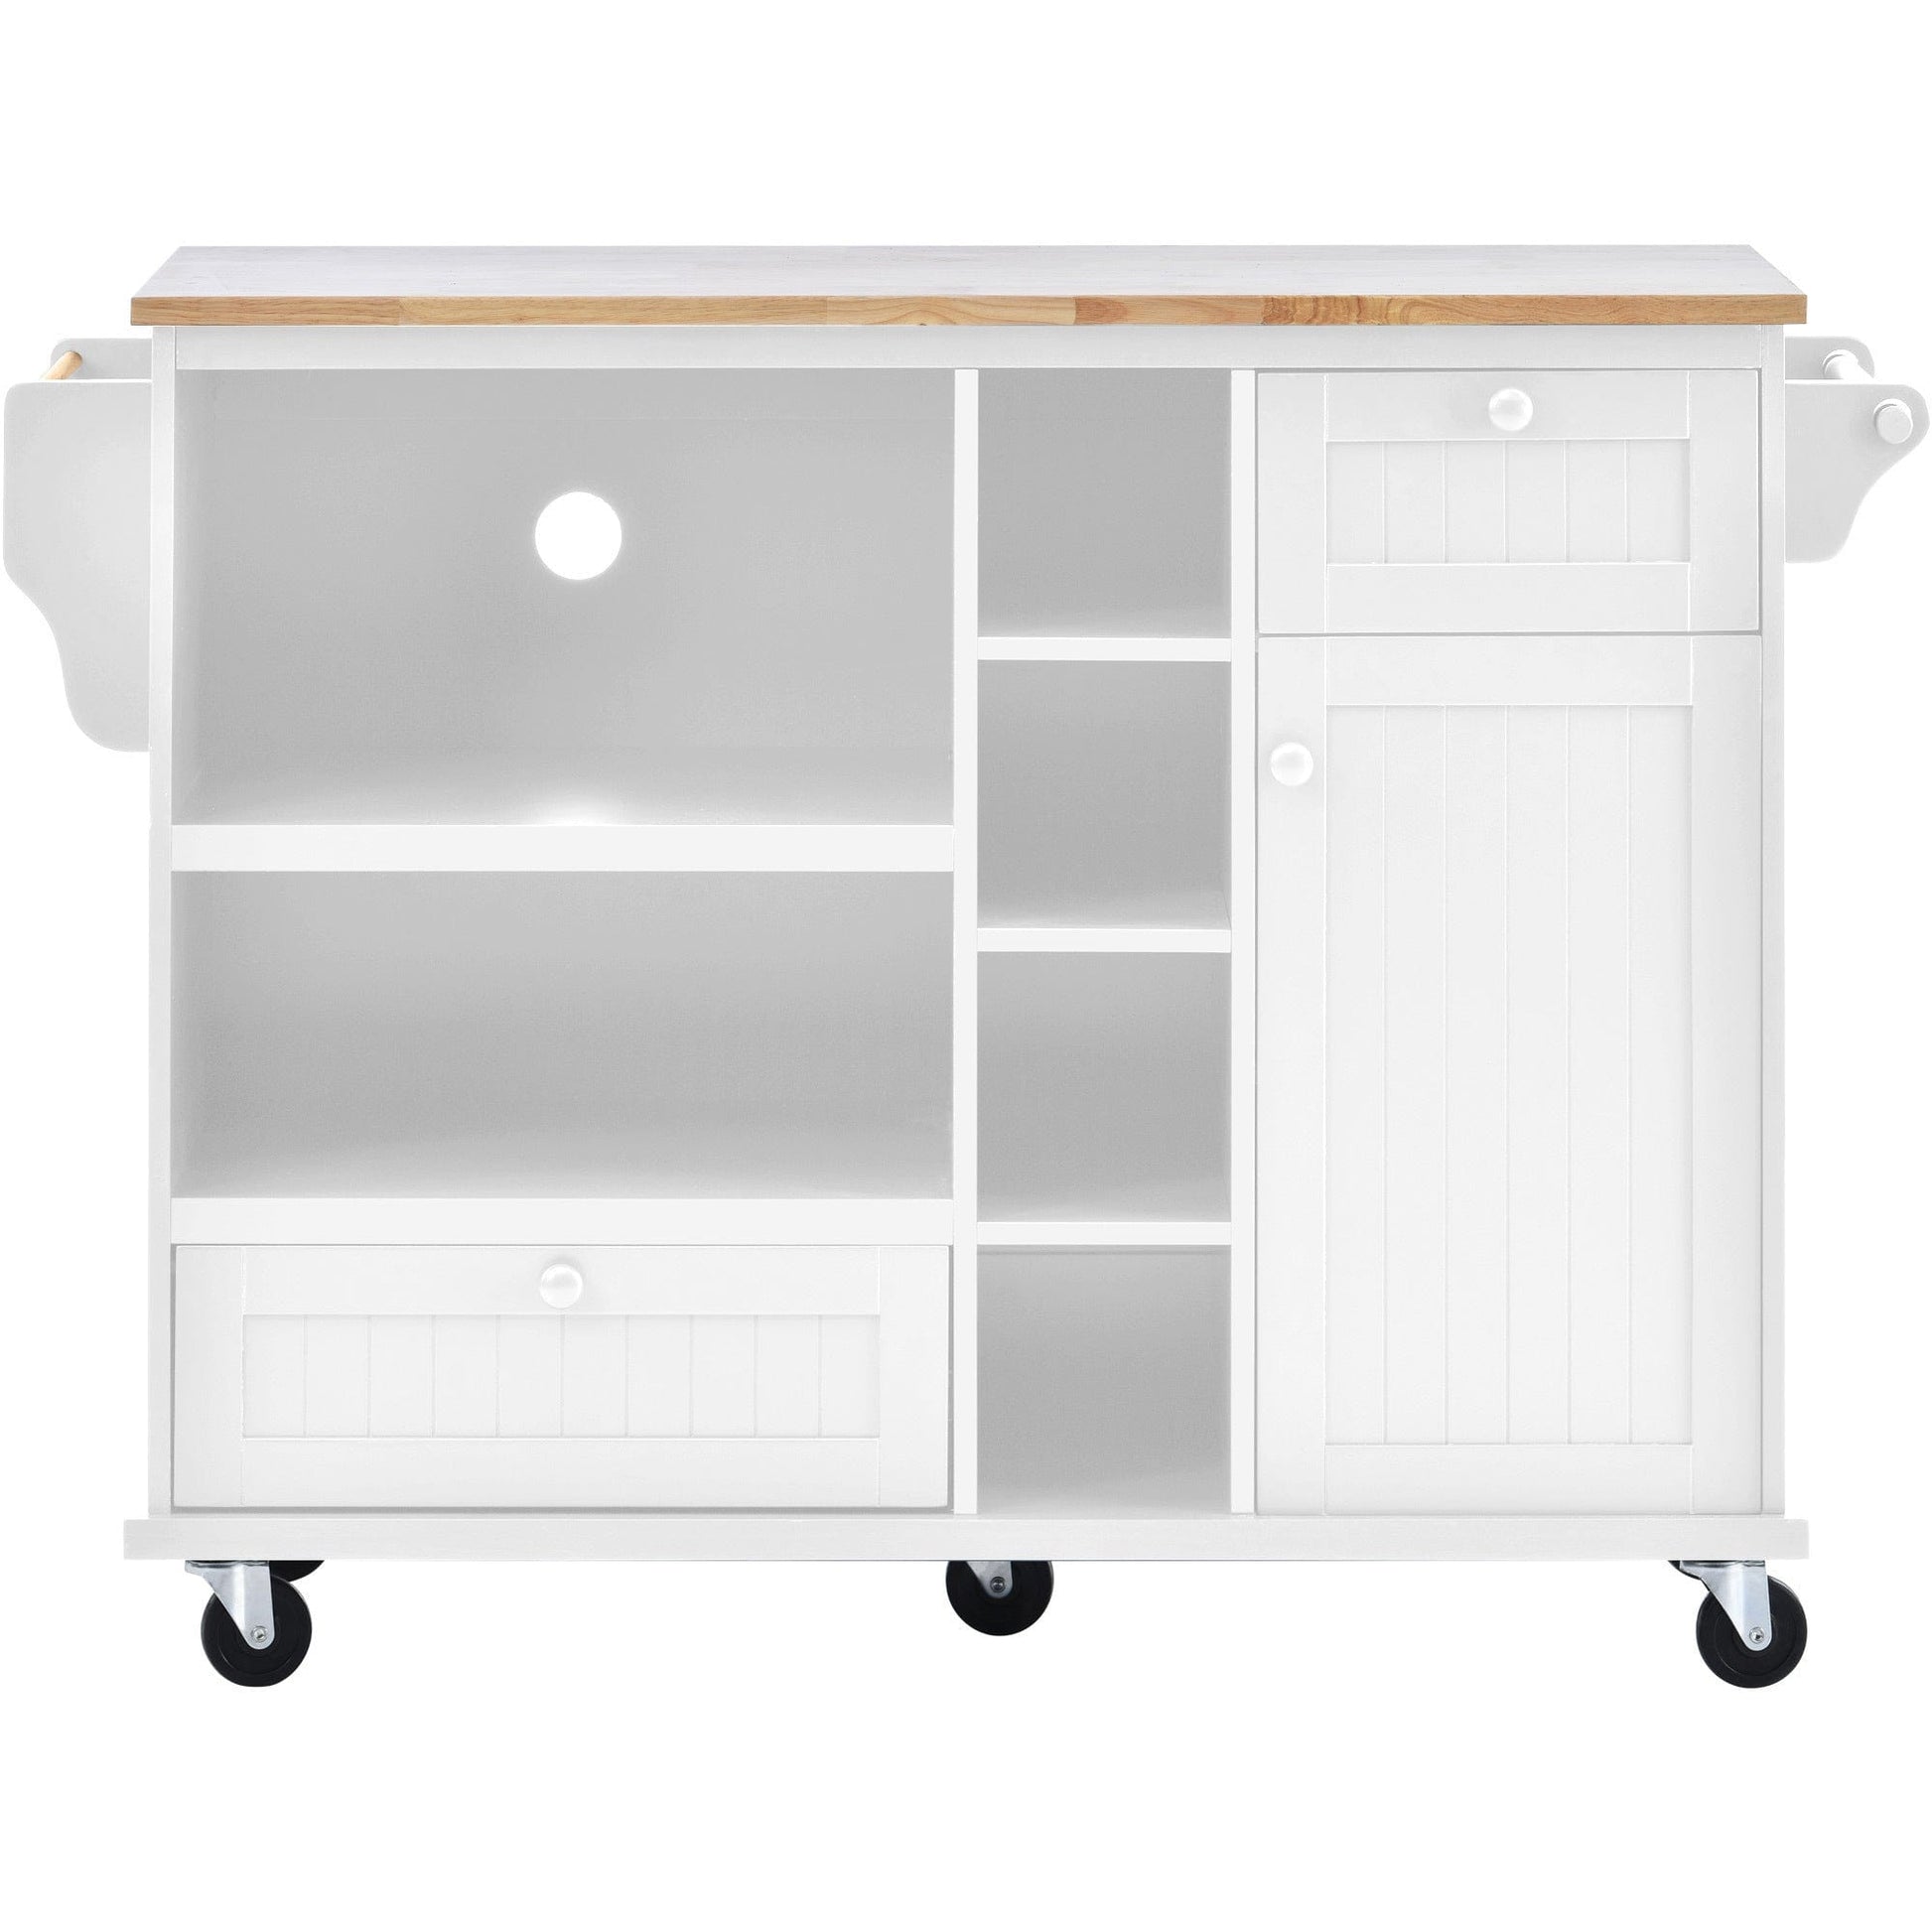 1st Choice Furniture Direct 1st Choice Sturdy Island Cart with Storage Cabinet and Two Locking Wheels